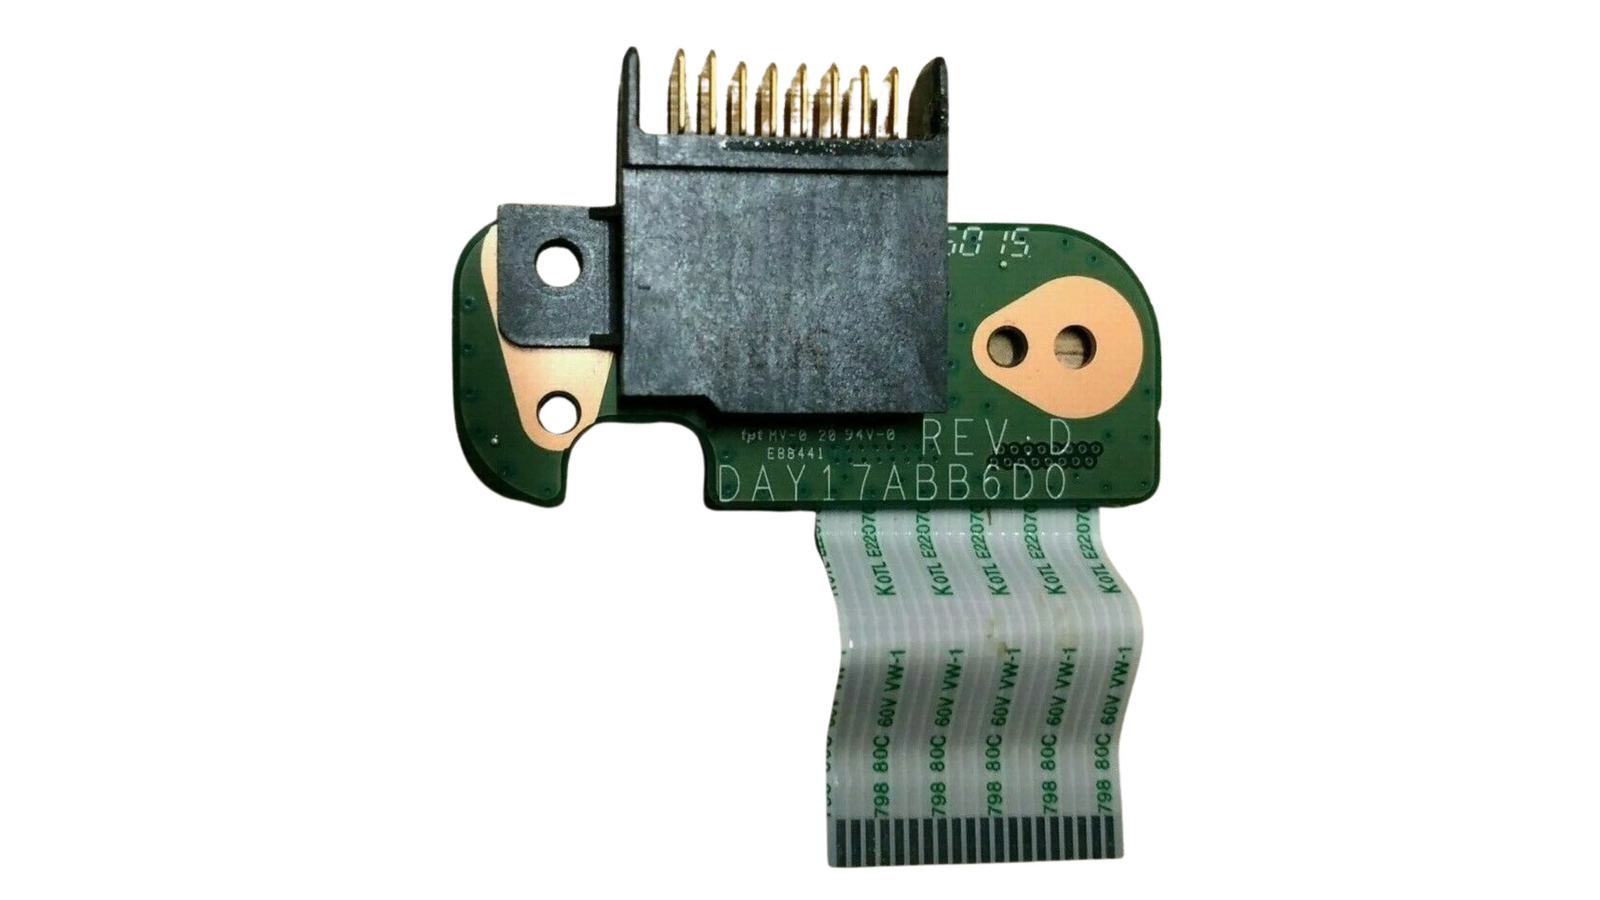 DAY17ABB6D0 battery connector board